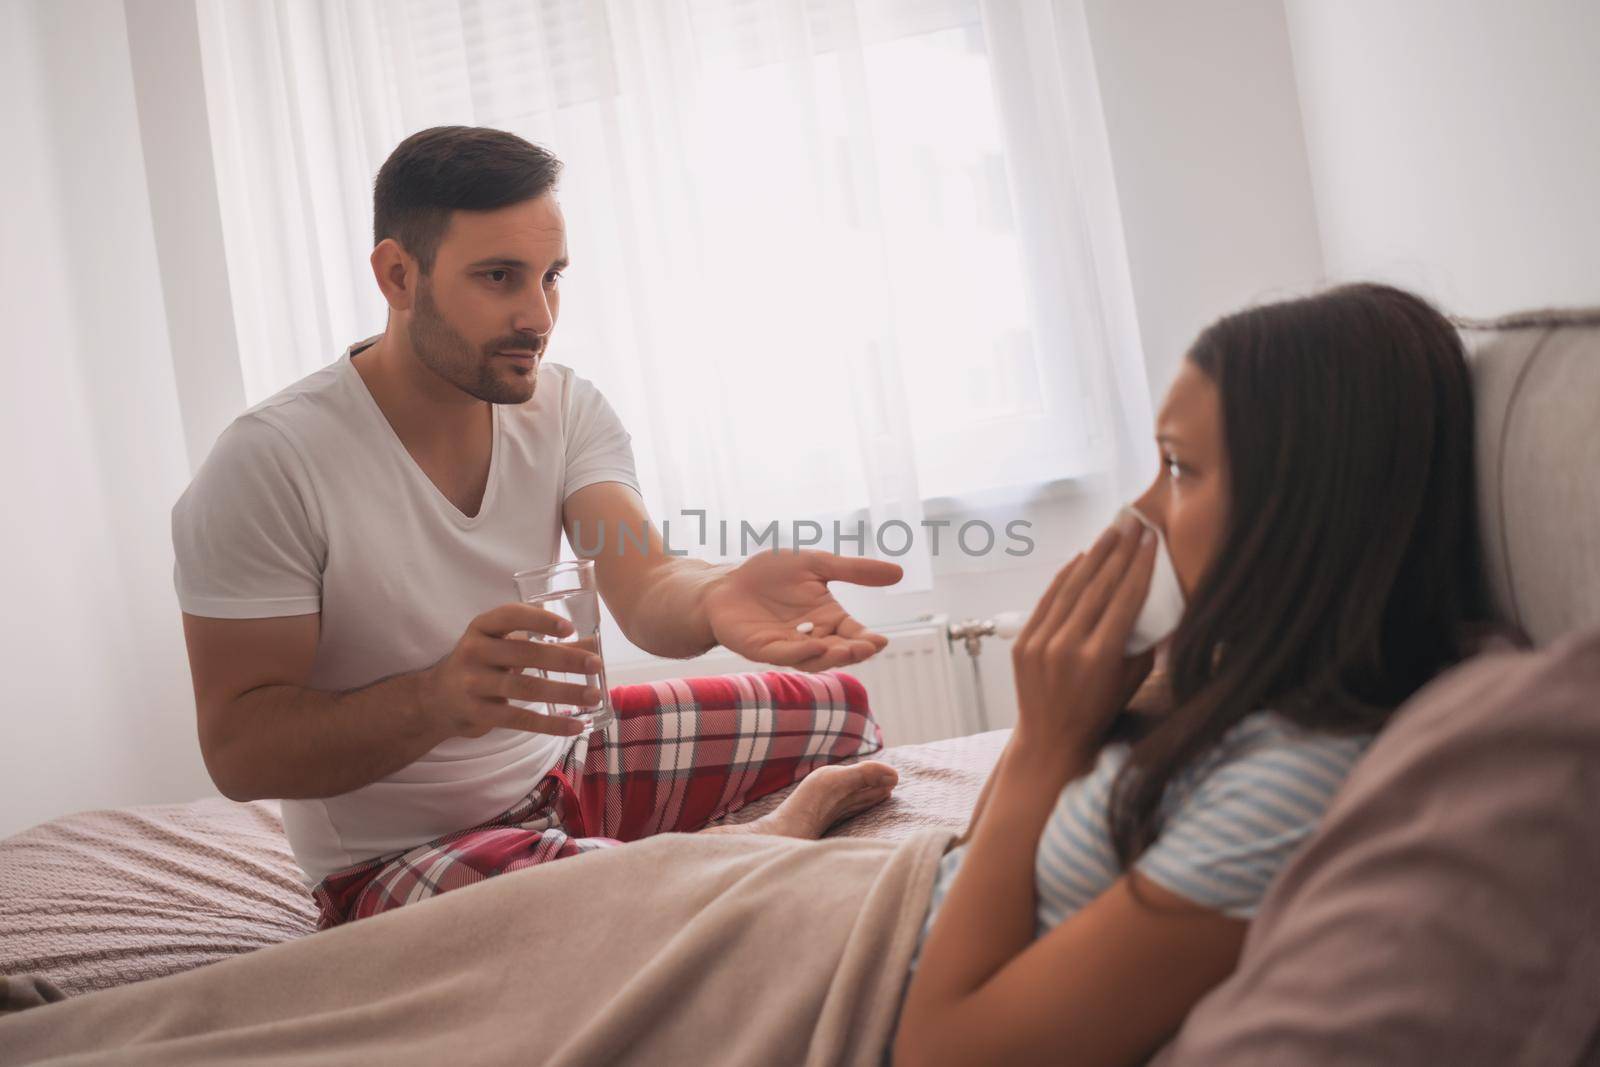 Woman is sick, man is giving her pills.